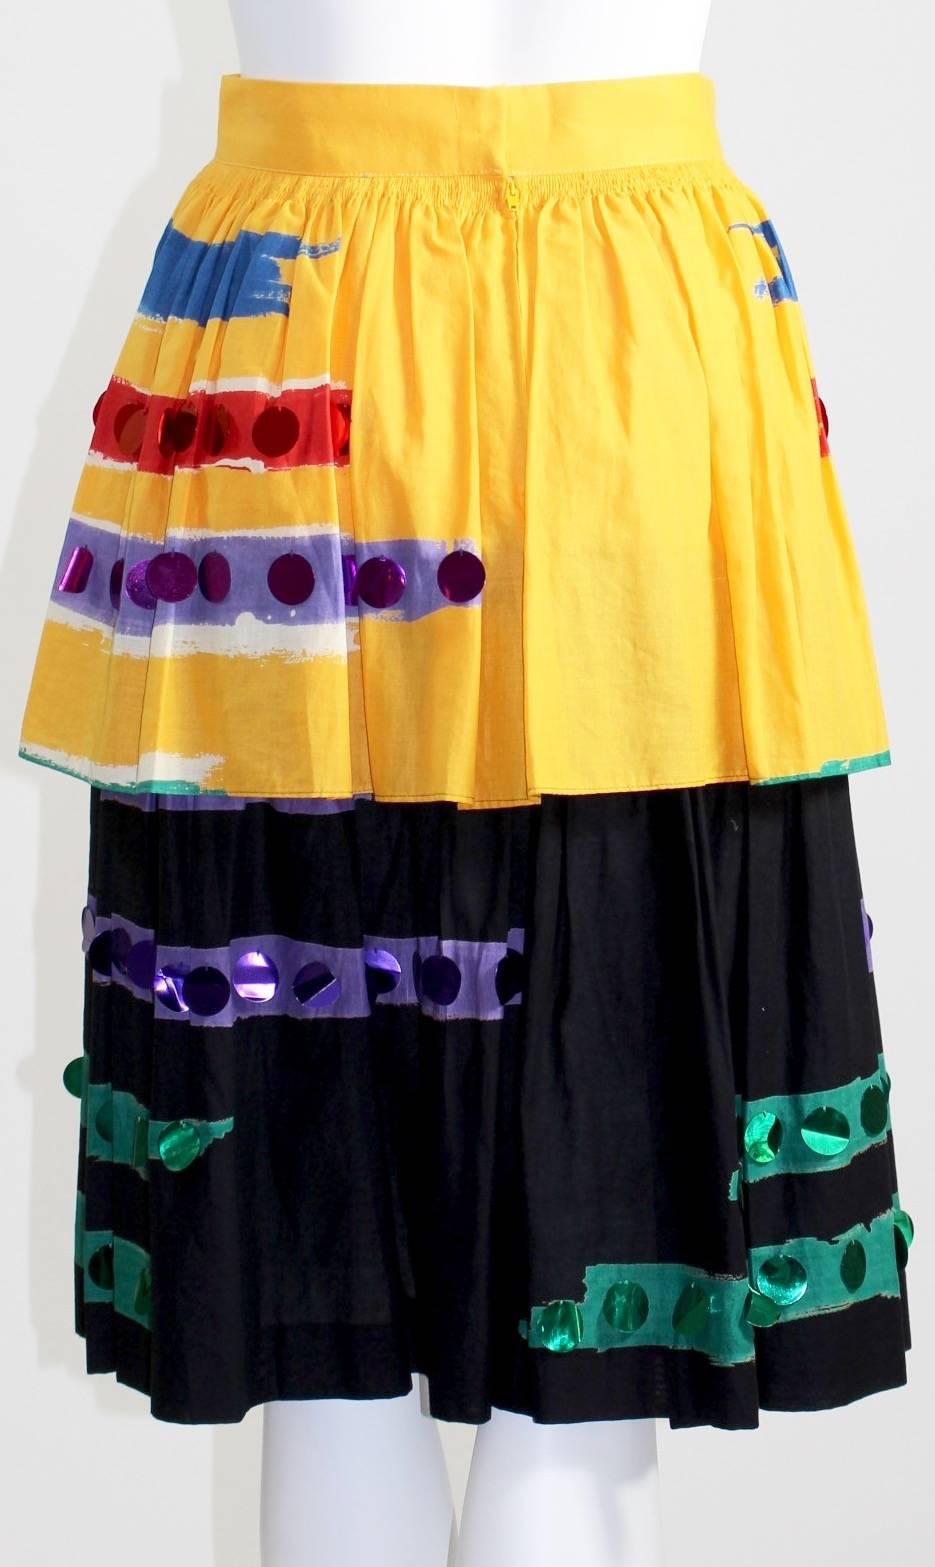  1980s Michaele Vollbrach Colorful Cotton Layered Gypsy Pheasant Skirt  2